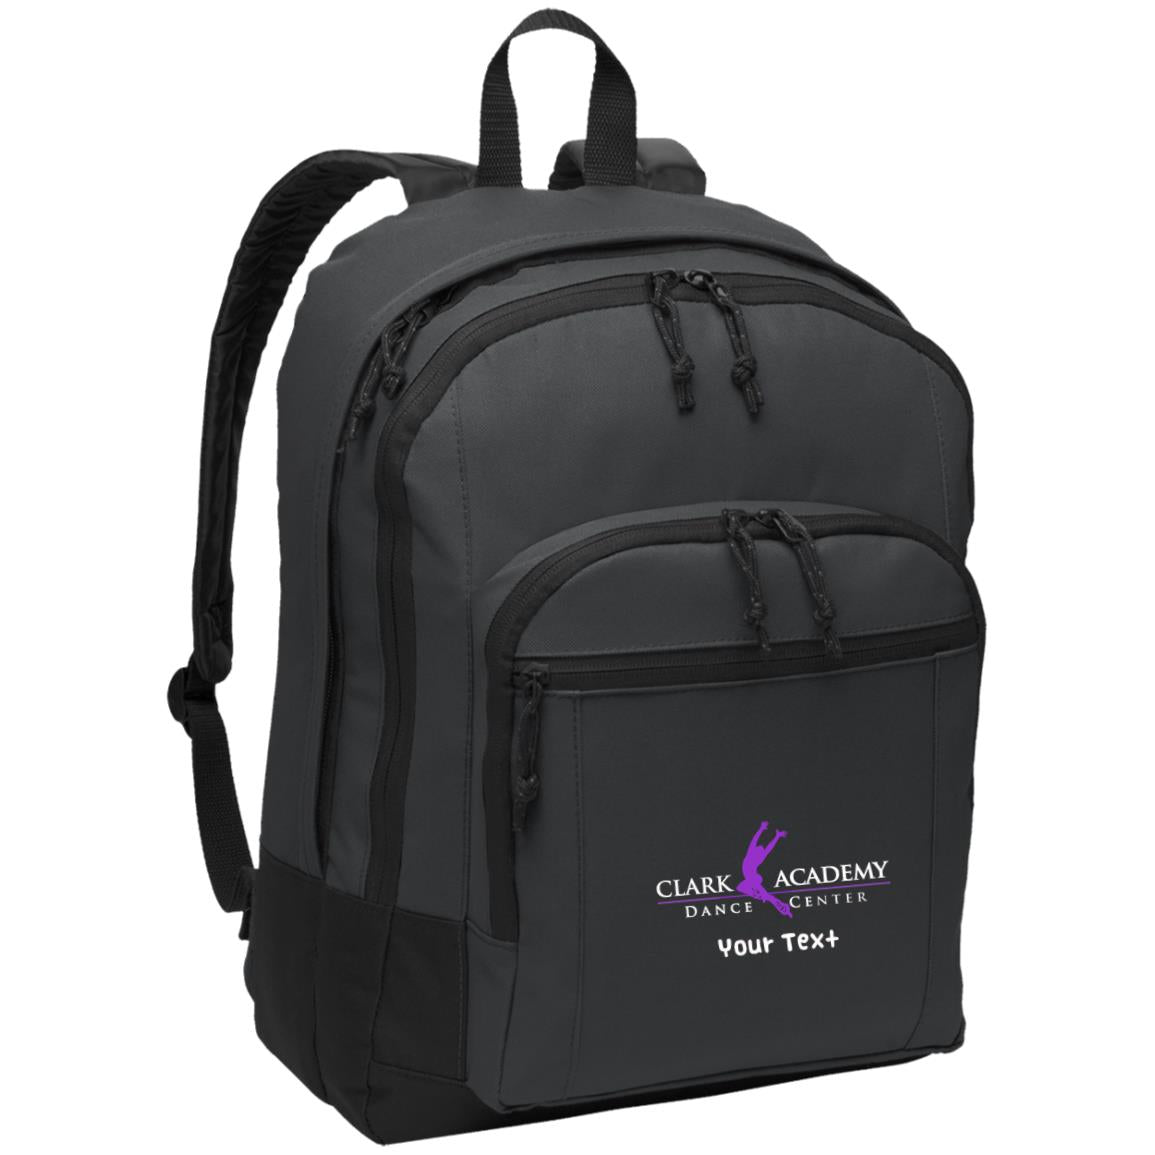 CADC Backpack - Free Personalization